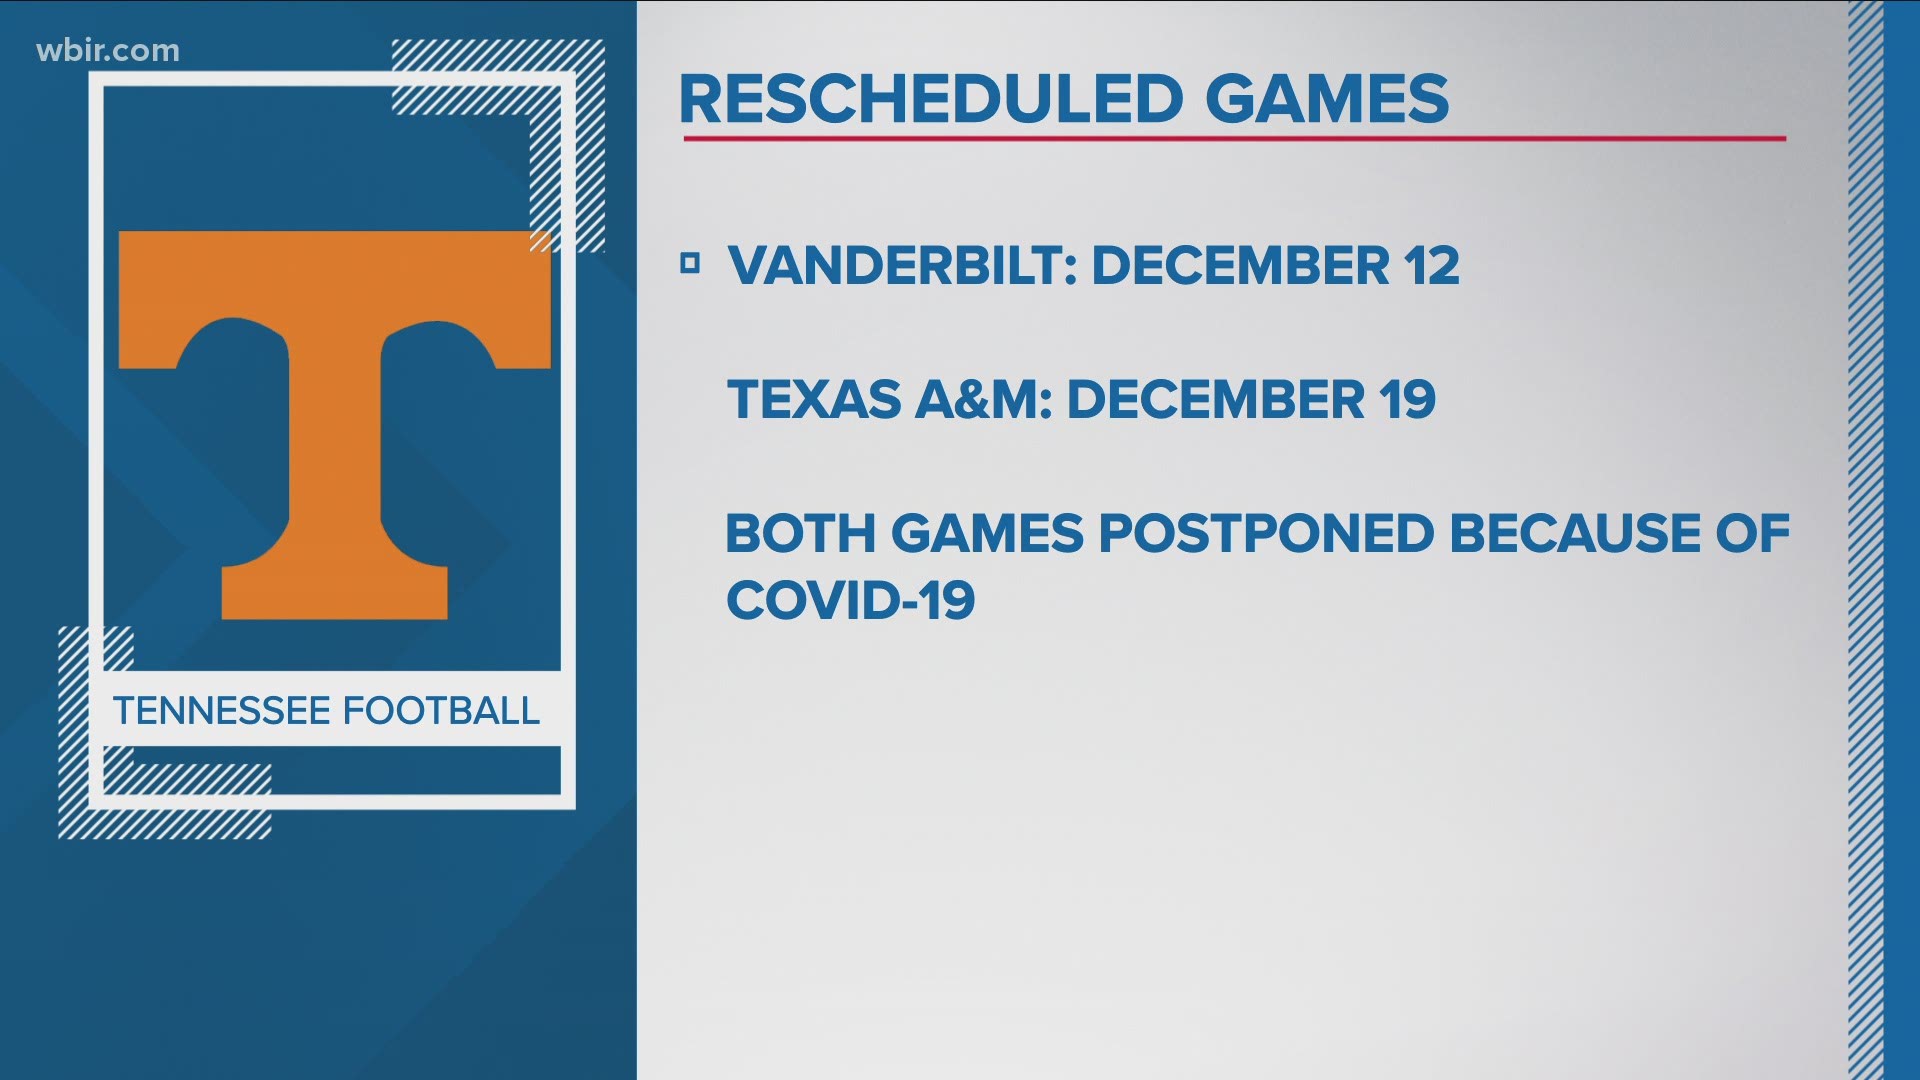 Tennessee Athletic Director Phillip Fulmer released when the Vols will make up their games against Texas A&M and Vanderbilt.